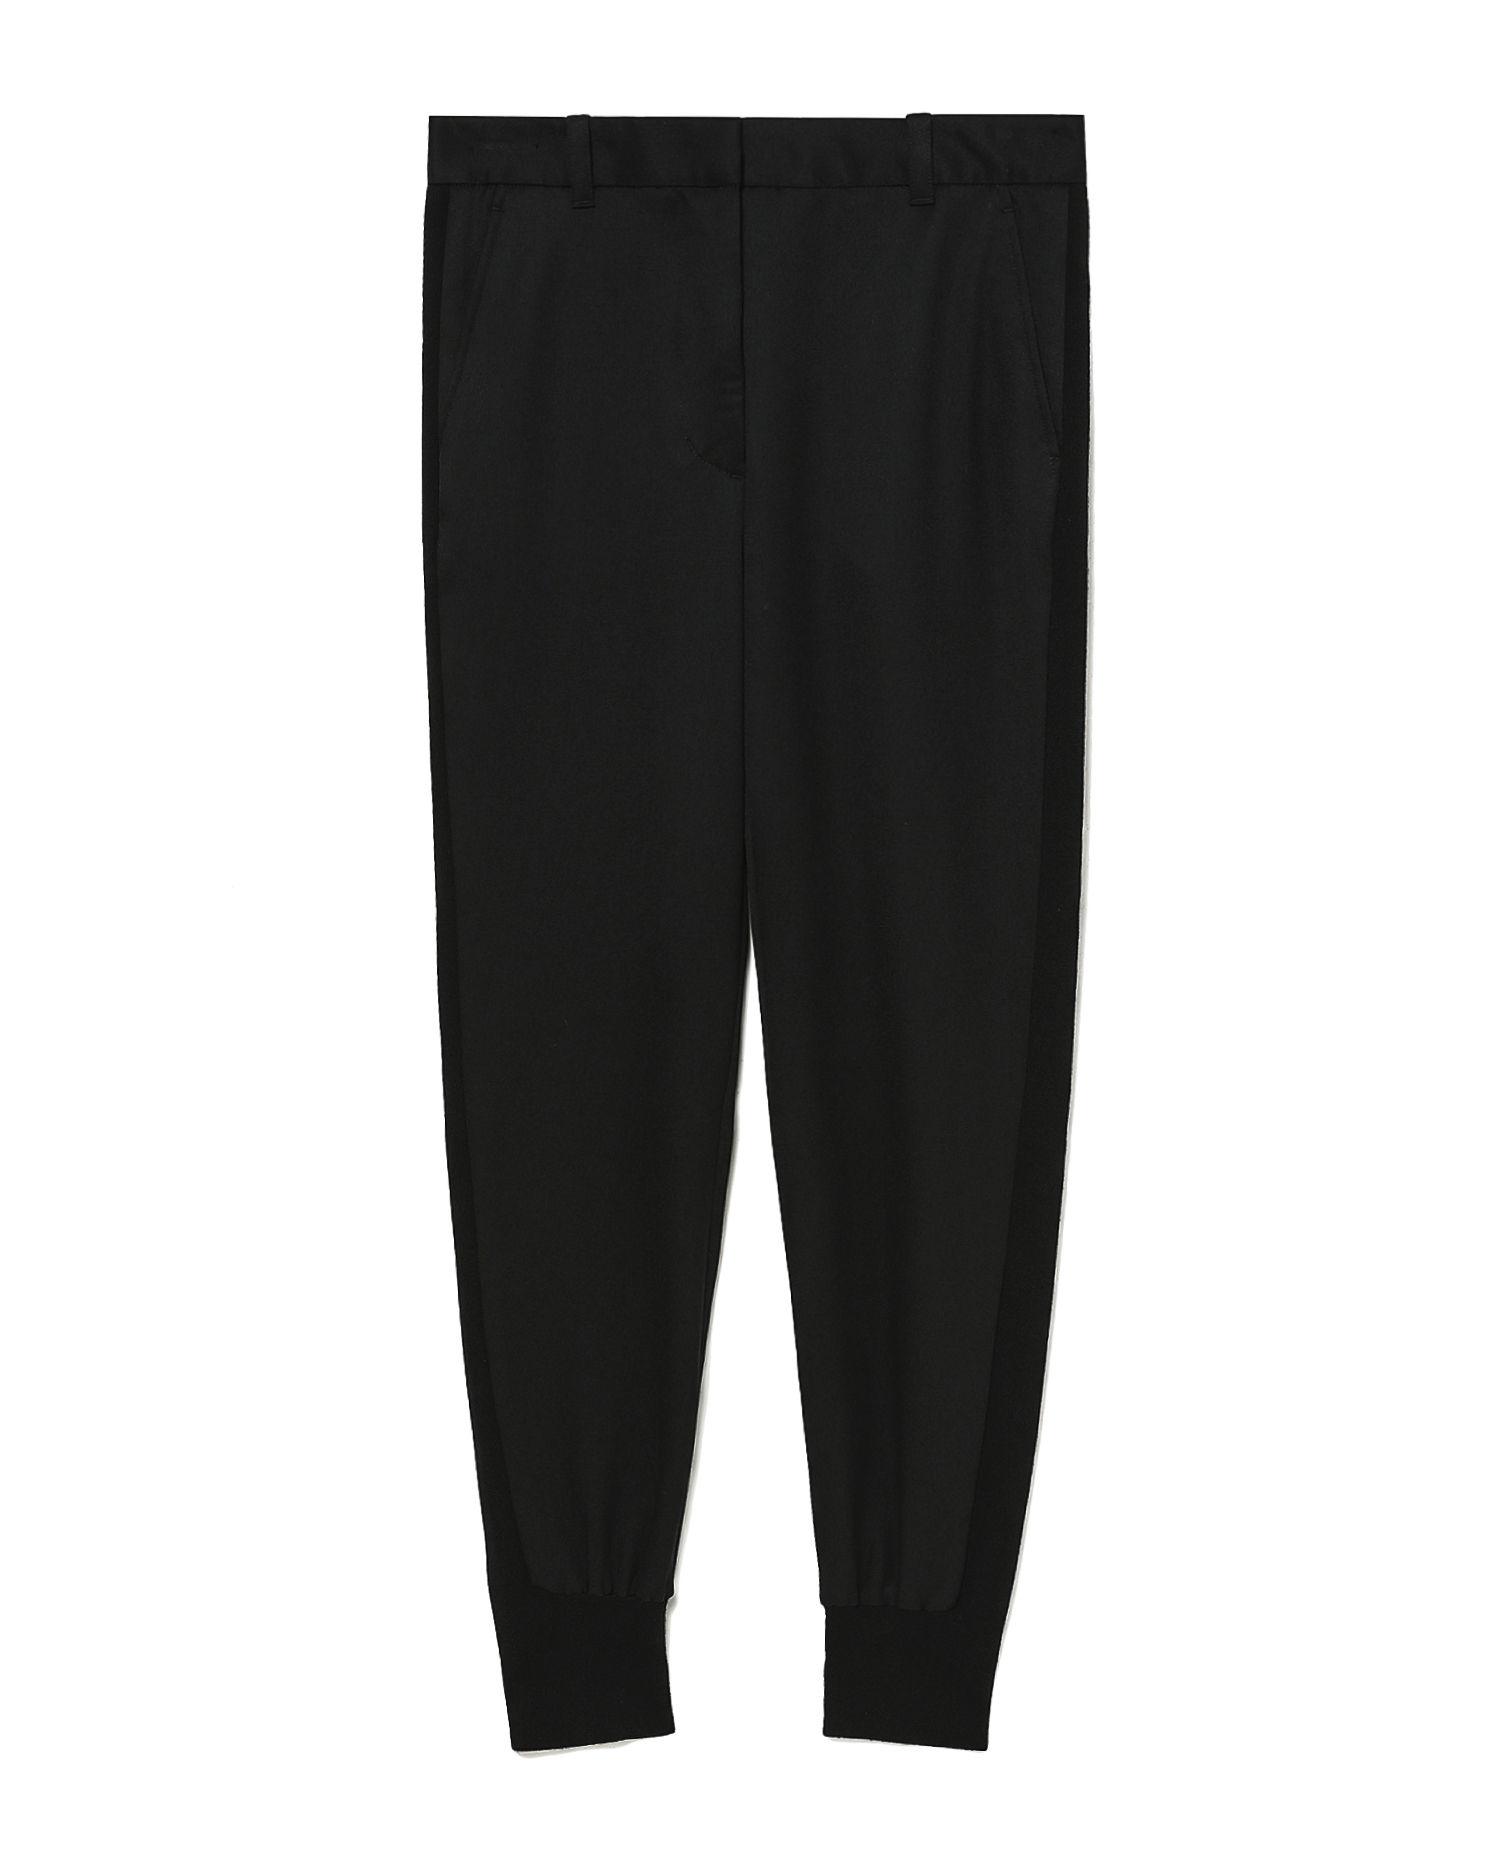 Tapered wool pants by 3.1 PHILLIP LIM